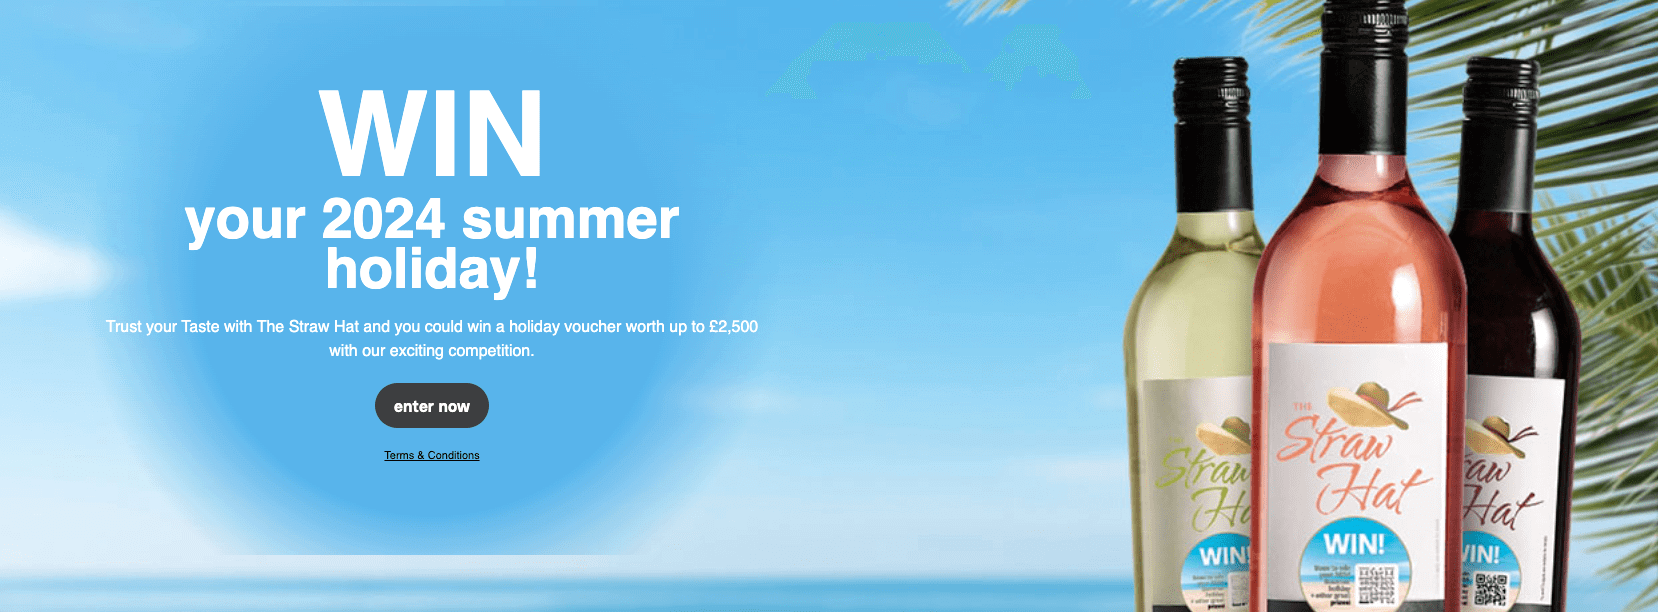 Win your 2024 summer holiday with The Straw Hat